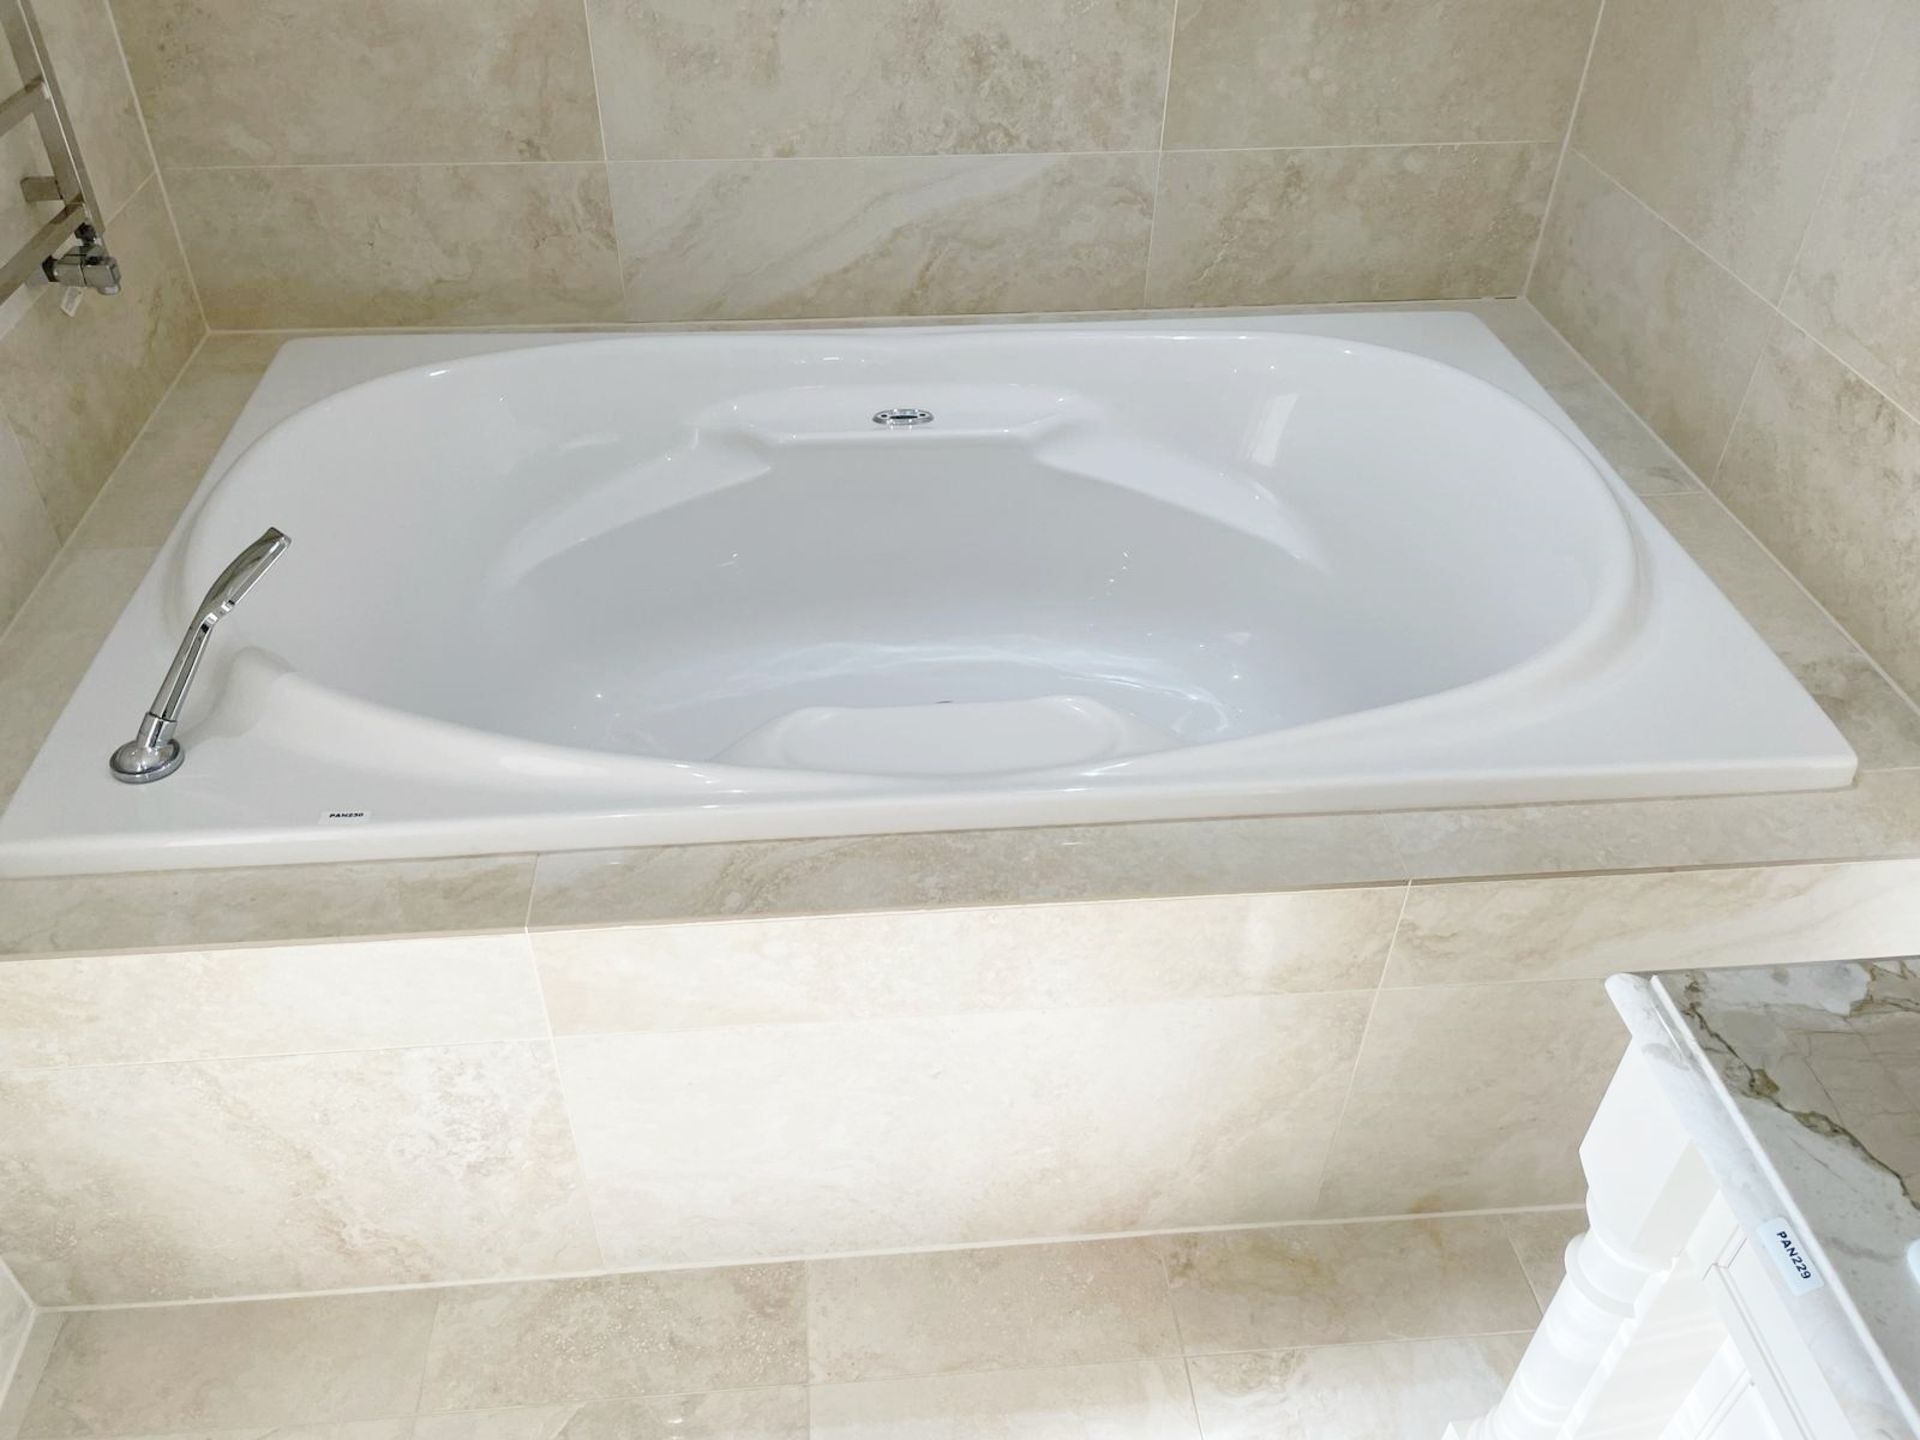 1 x AIRBATH Large Jacuzzi Spa Bath, with Axor Thermostat  - Ref: PAN230 Bed1/bth - CL896 - NO VAT - Image 14 of 20